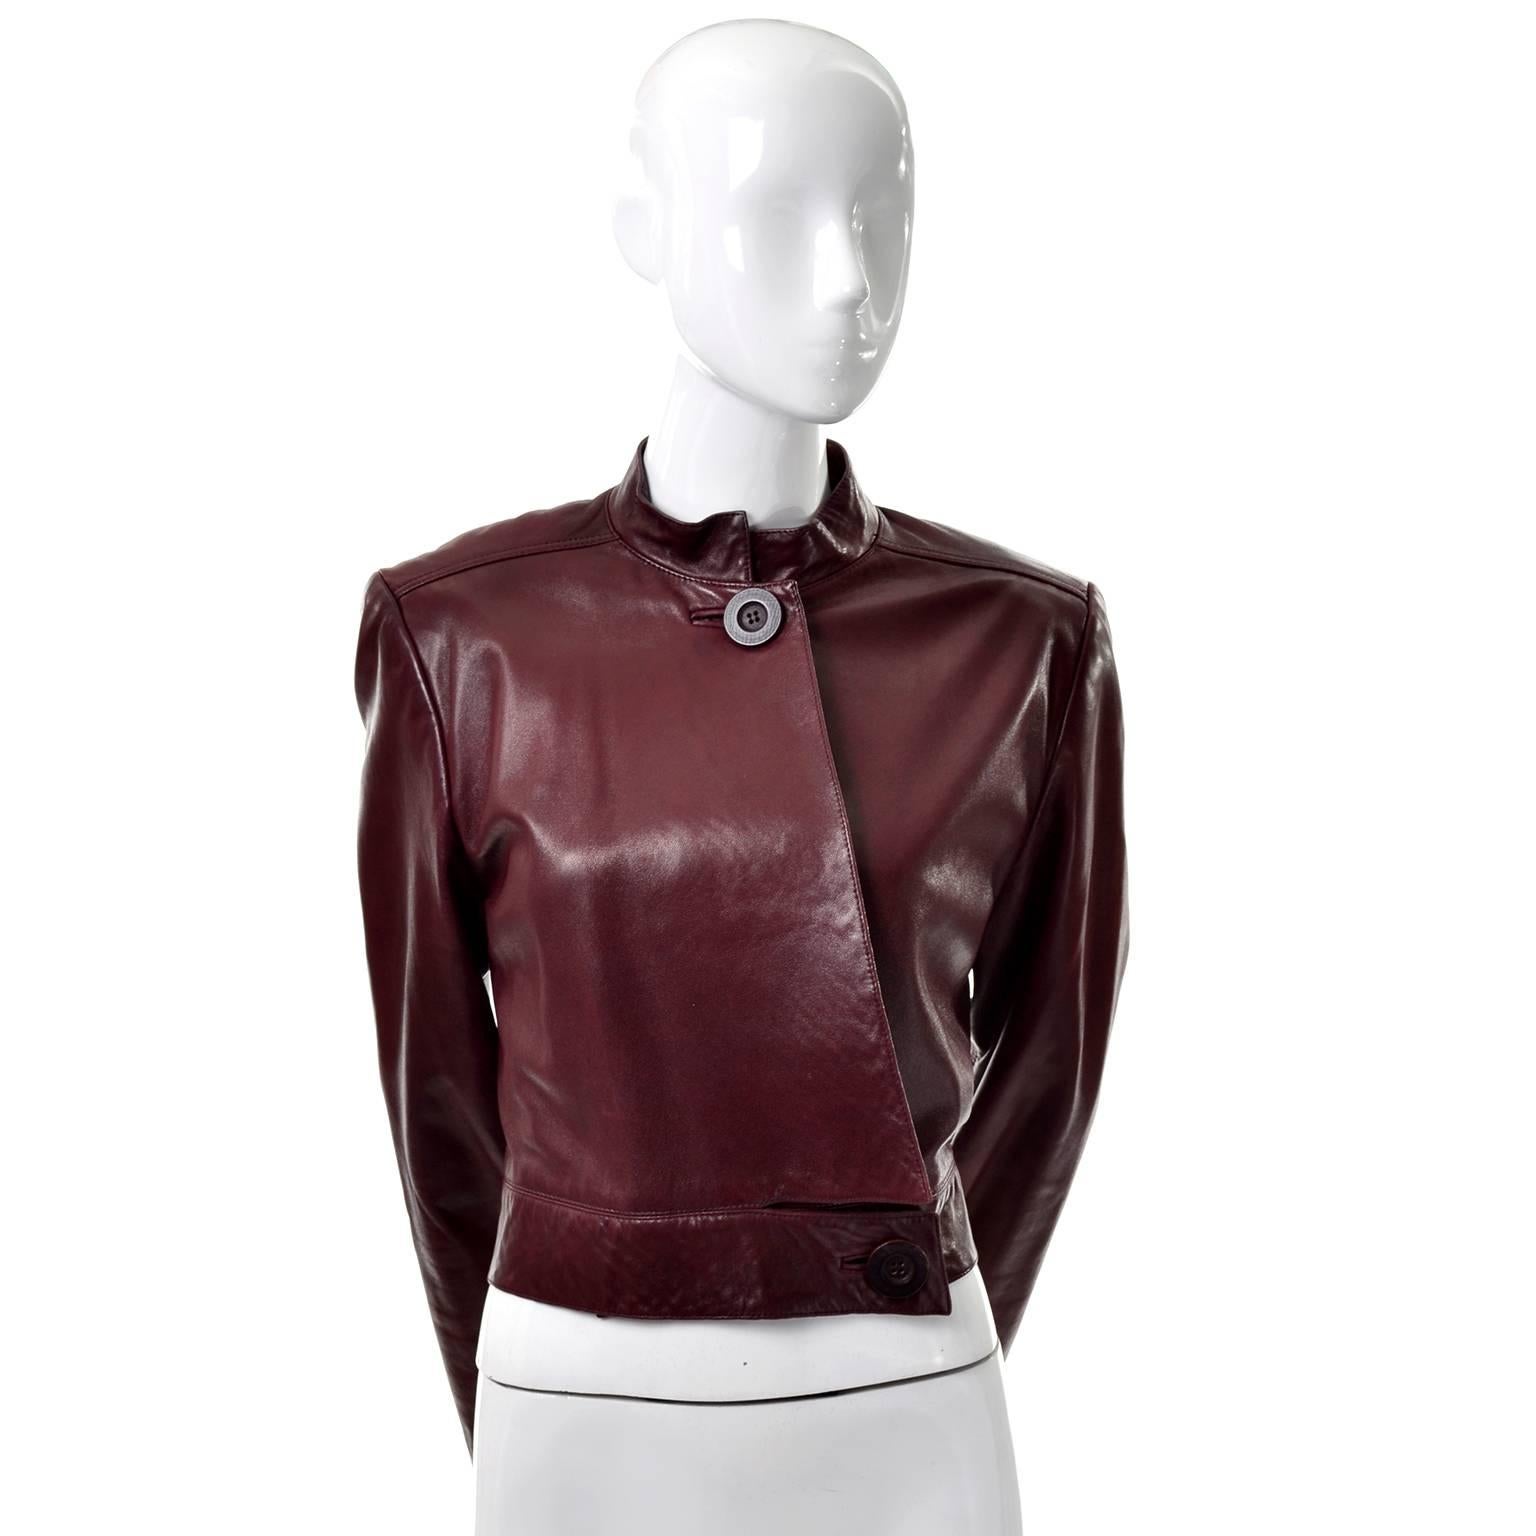 This is a buttery soft vintage cropped cordovan lambskin leather jacket from Geoffrey Beene. The jacket has a mandarin collar and buttons in the front and we love the center pleat in the back.  This jacket was purchased at Neiman Marcus in the early